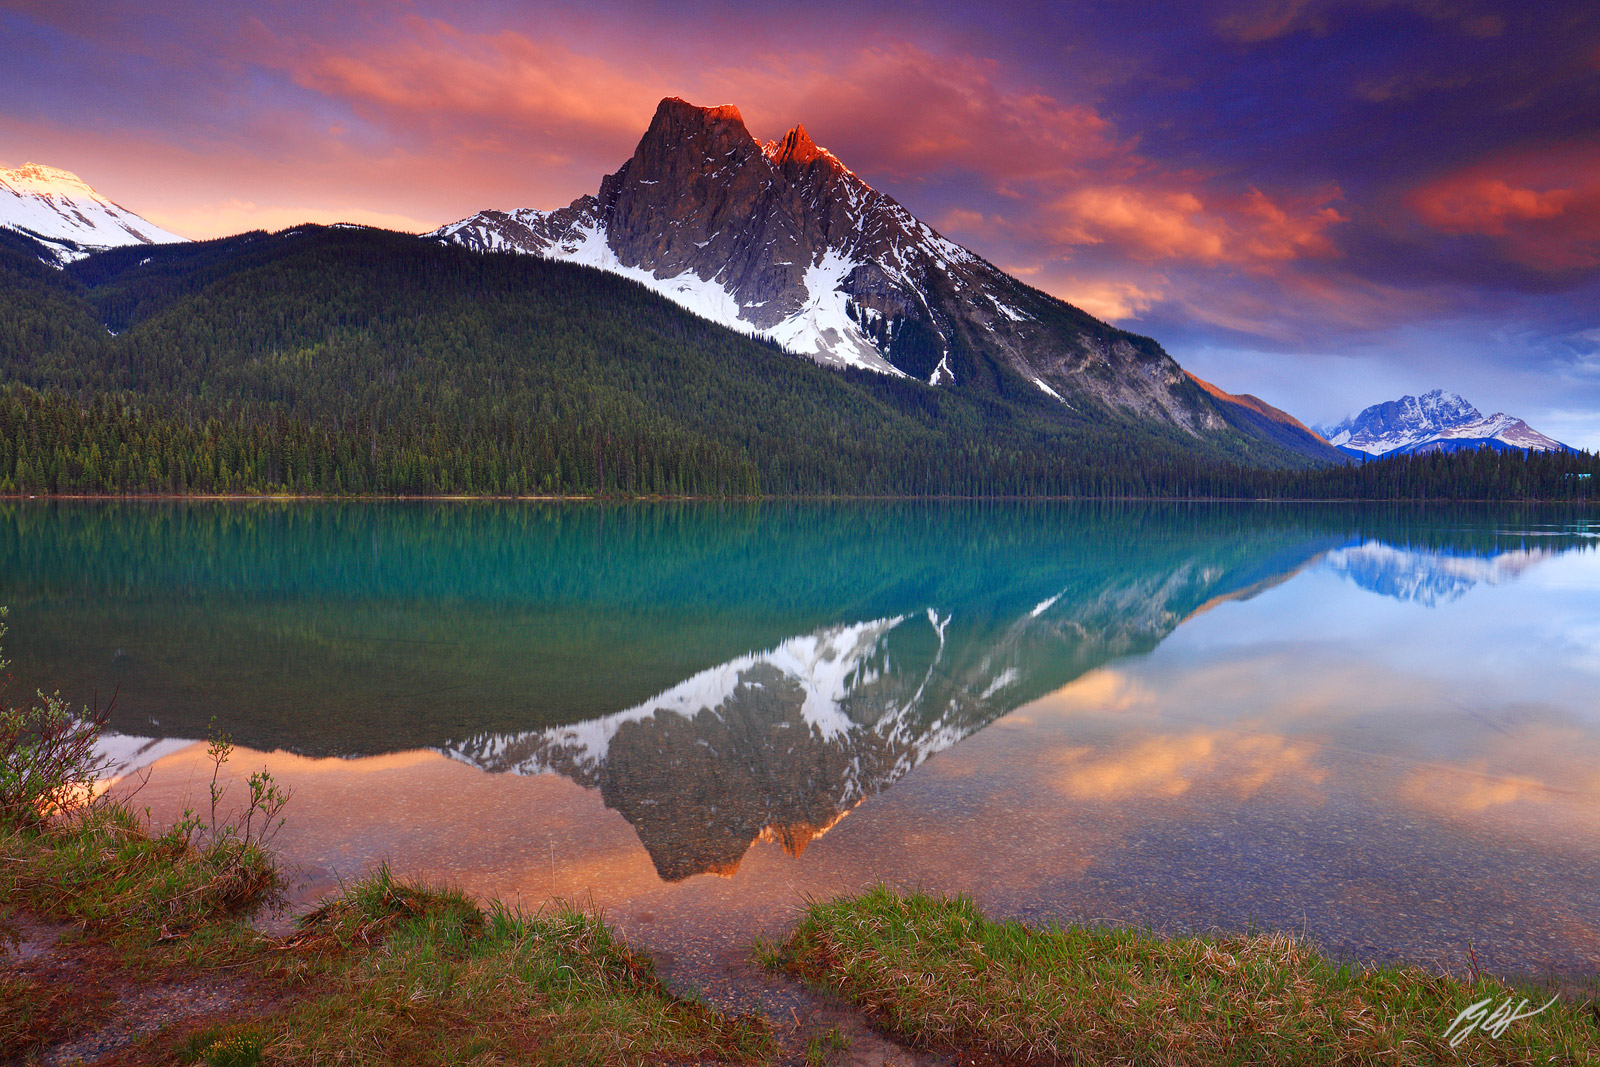 Sunset with Wapta Mountain Reflected in Emerald Lake in Yoho National Park in British Columbia, Canada